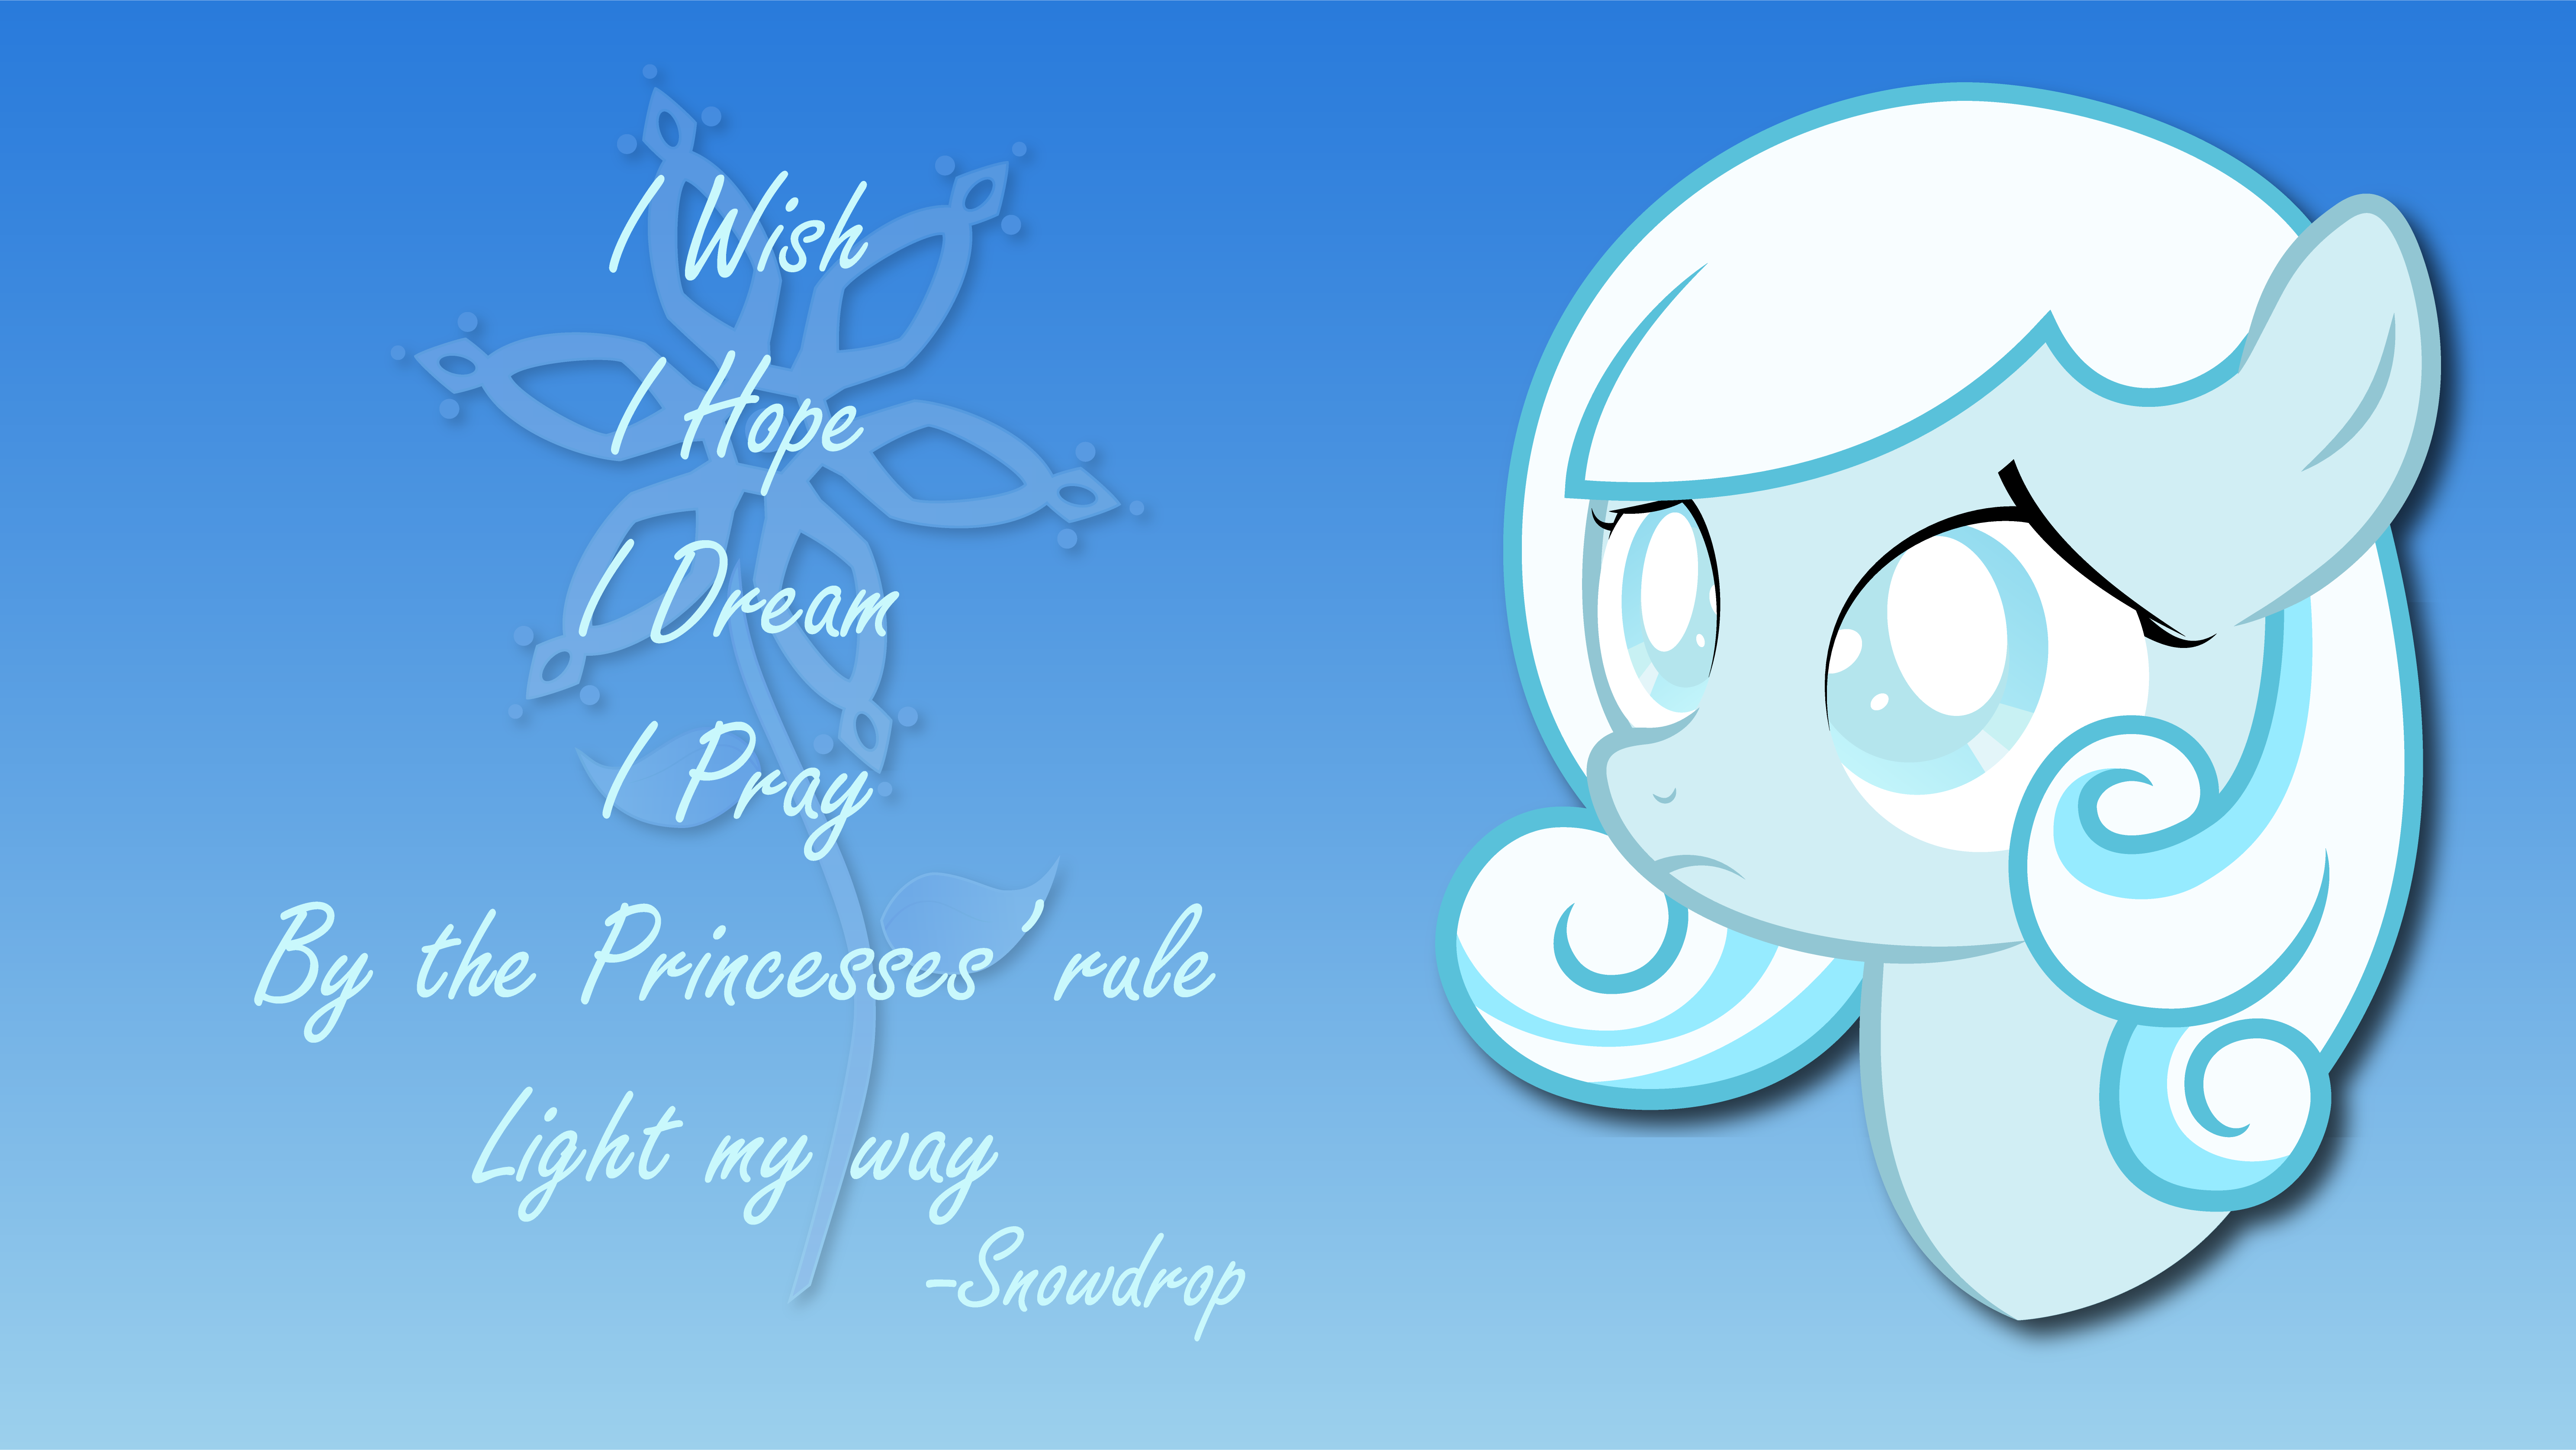 Snowdrop - I Wish - Wallpaper by Abion47 and TechRainbow